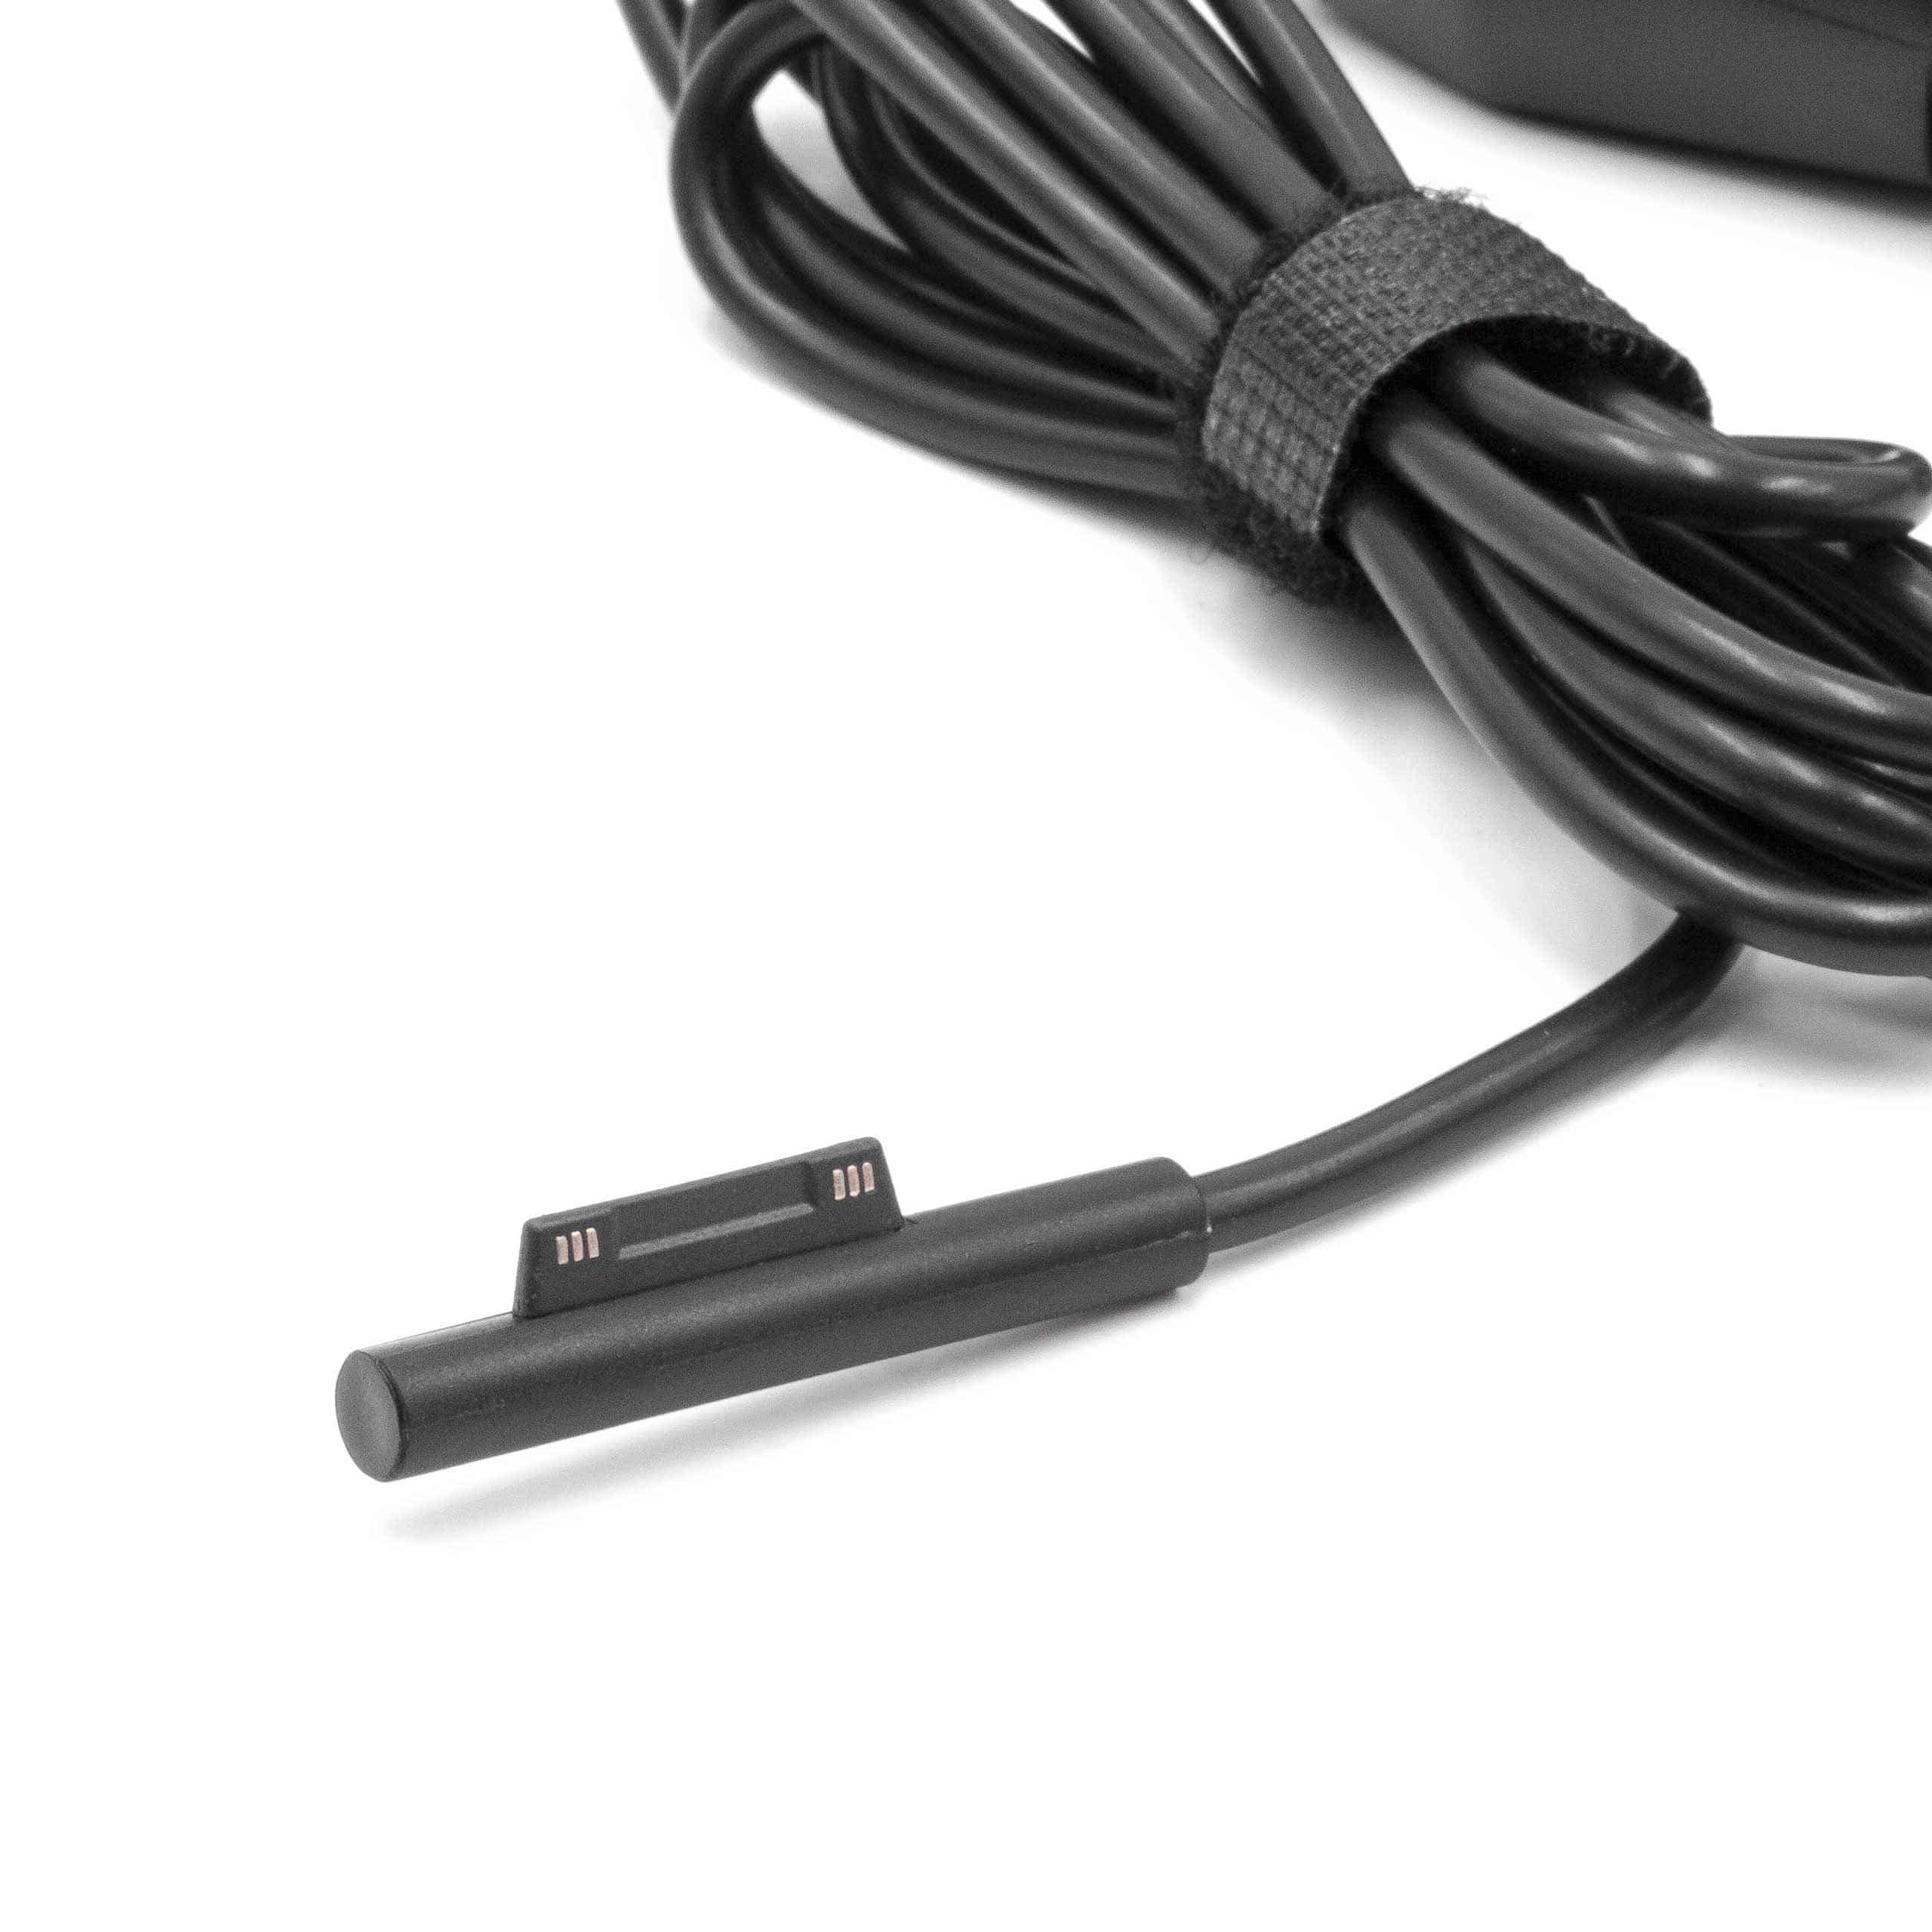 Vehicle Charger suitable for Microsoft Surface Book 2 Notebook, Tablet - 2.58 A